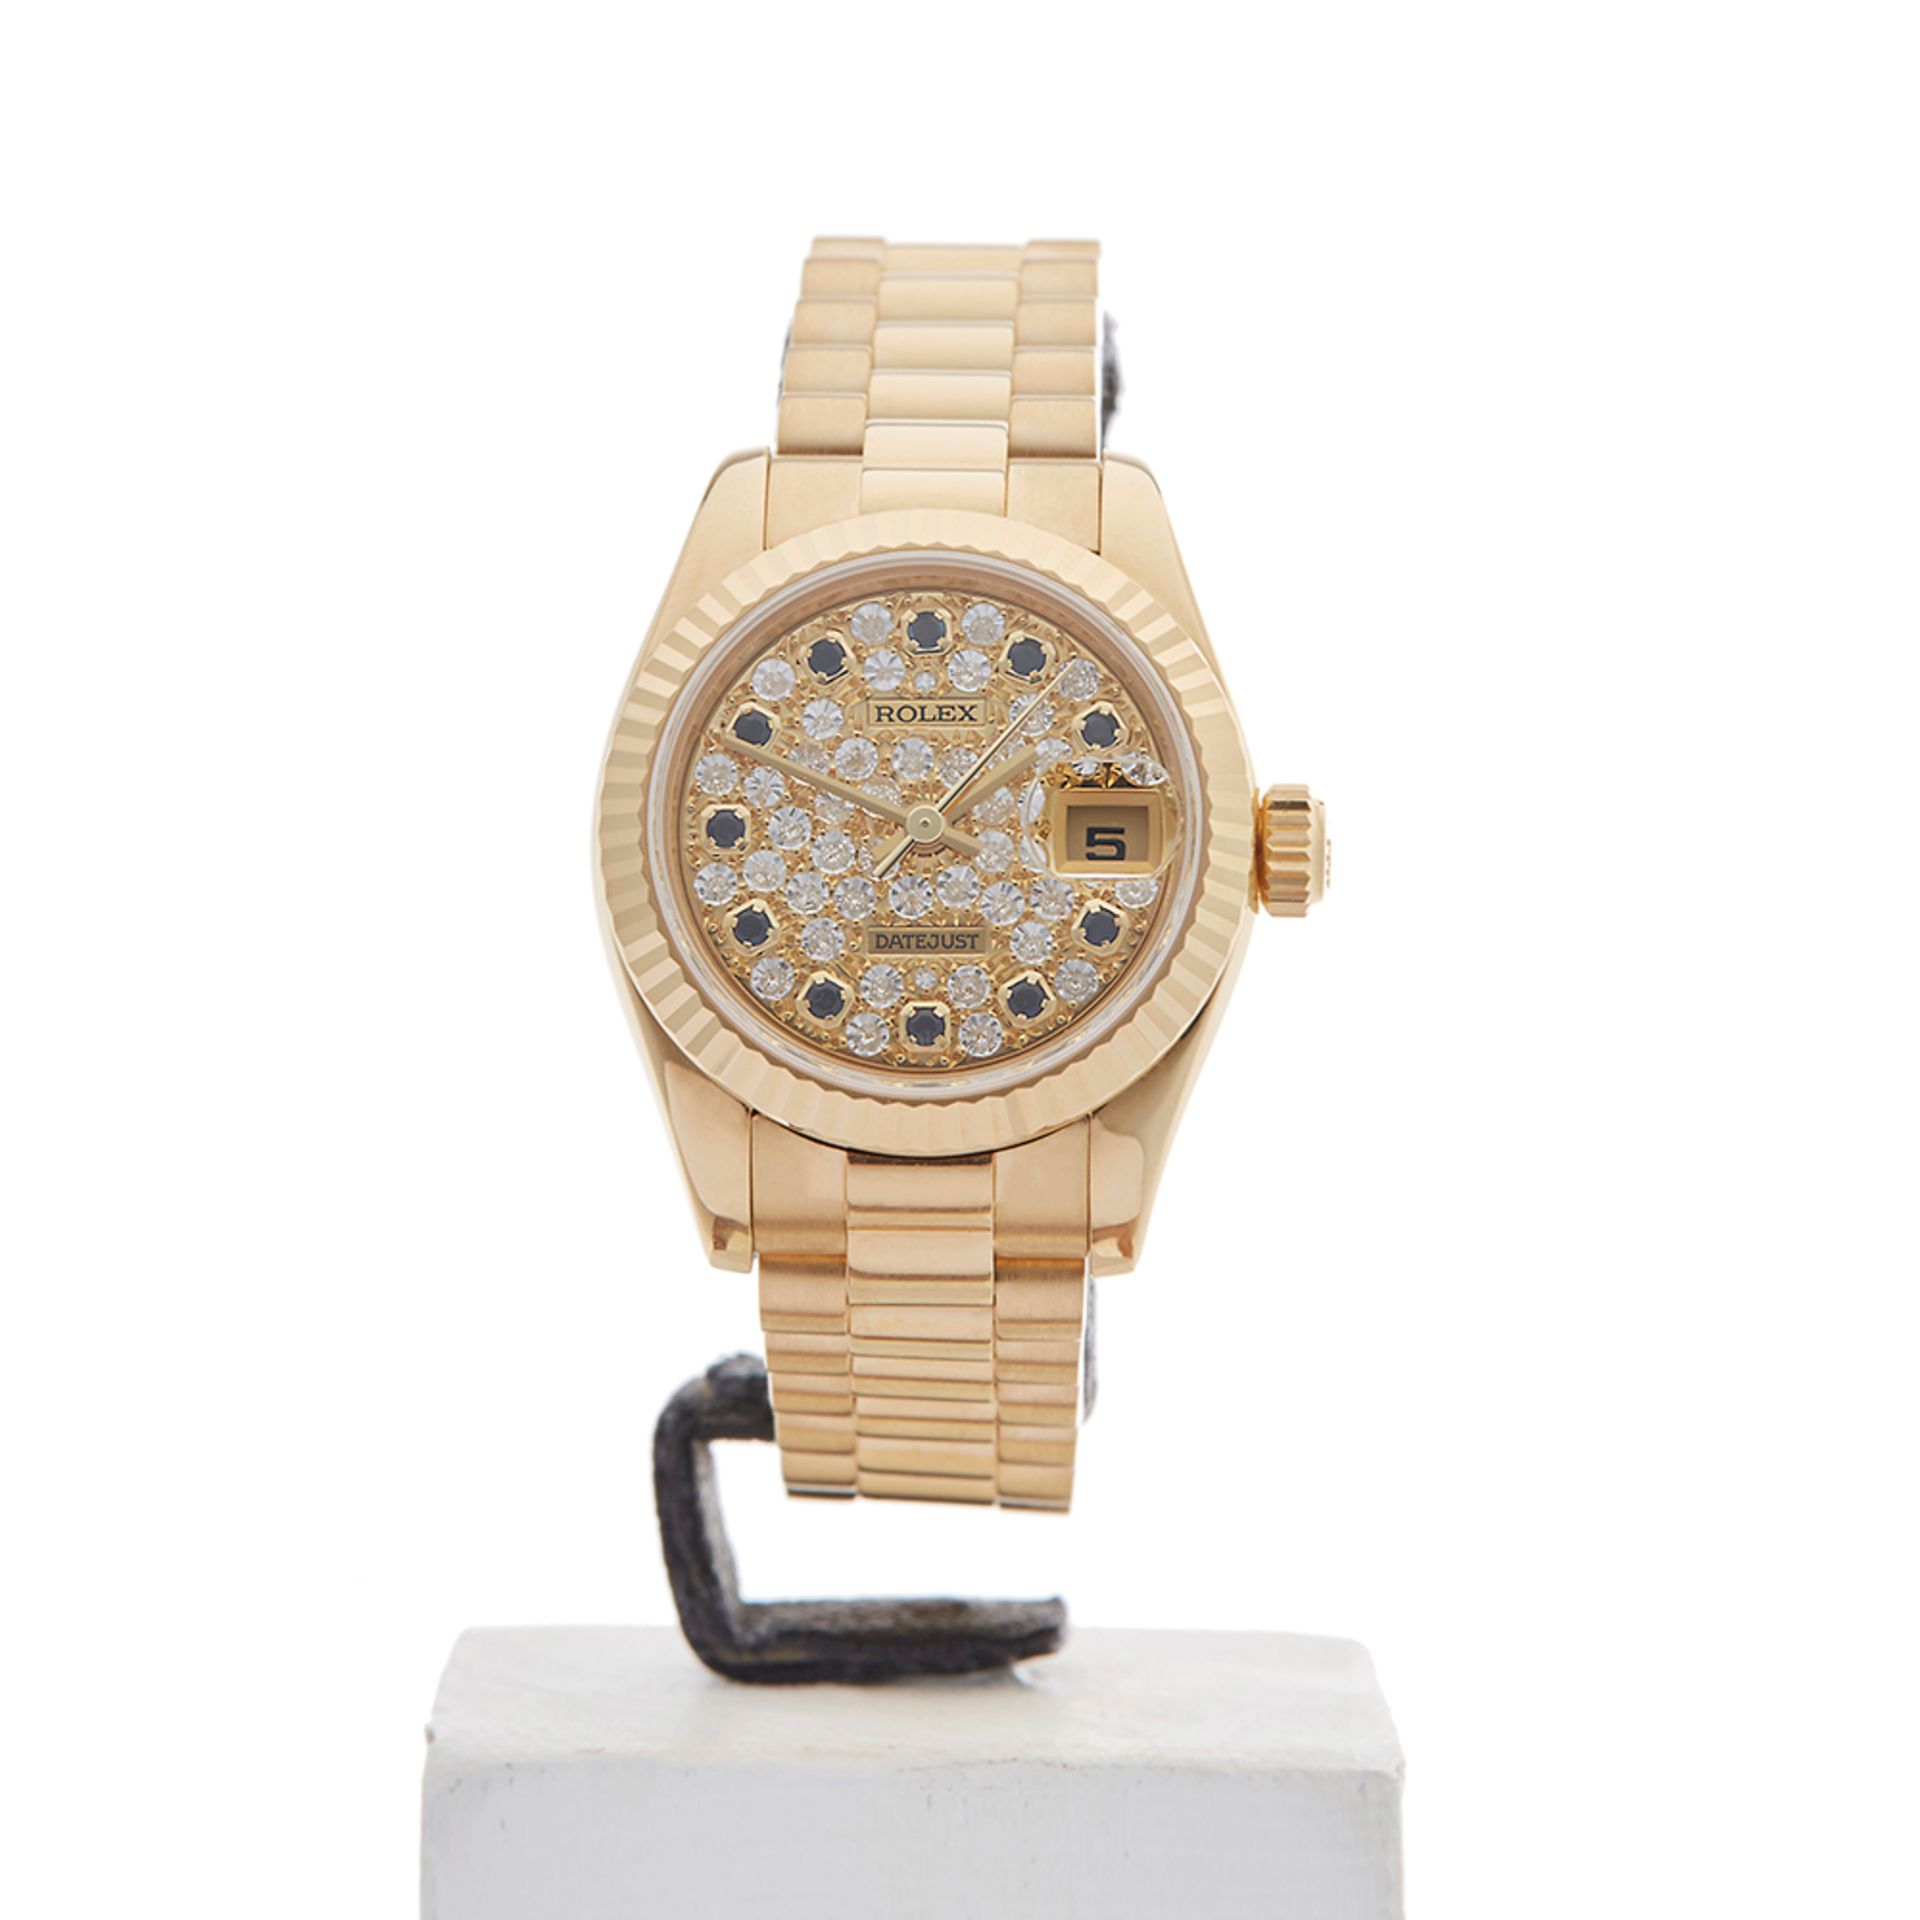 Datejust 26mm 18K Yellow Gold - 179178 - Image 2 of 9